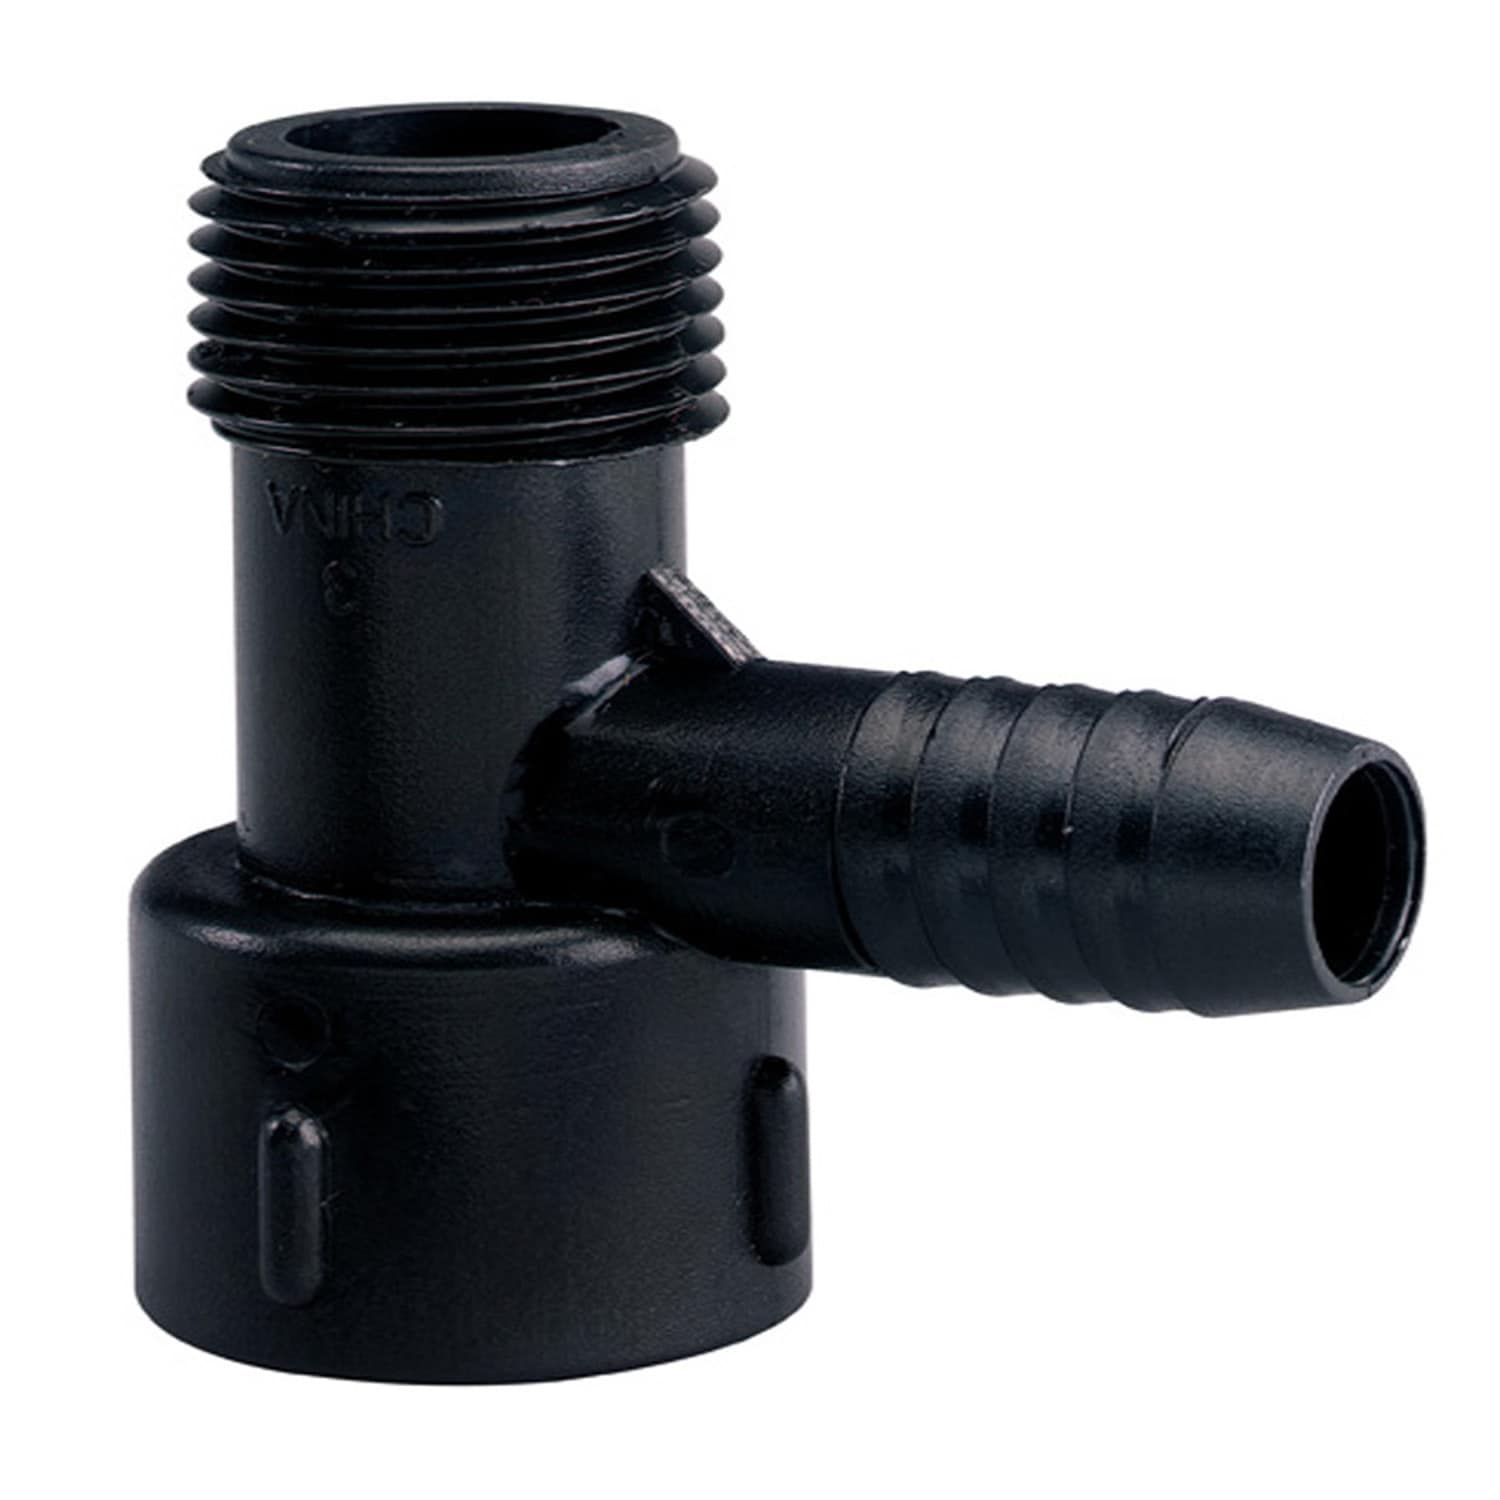 Threaded Drip Irrigation Fittings at